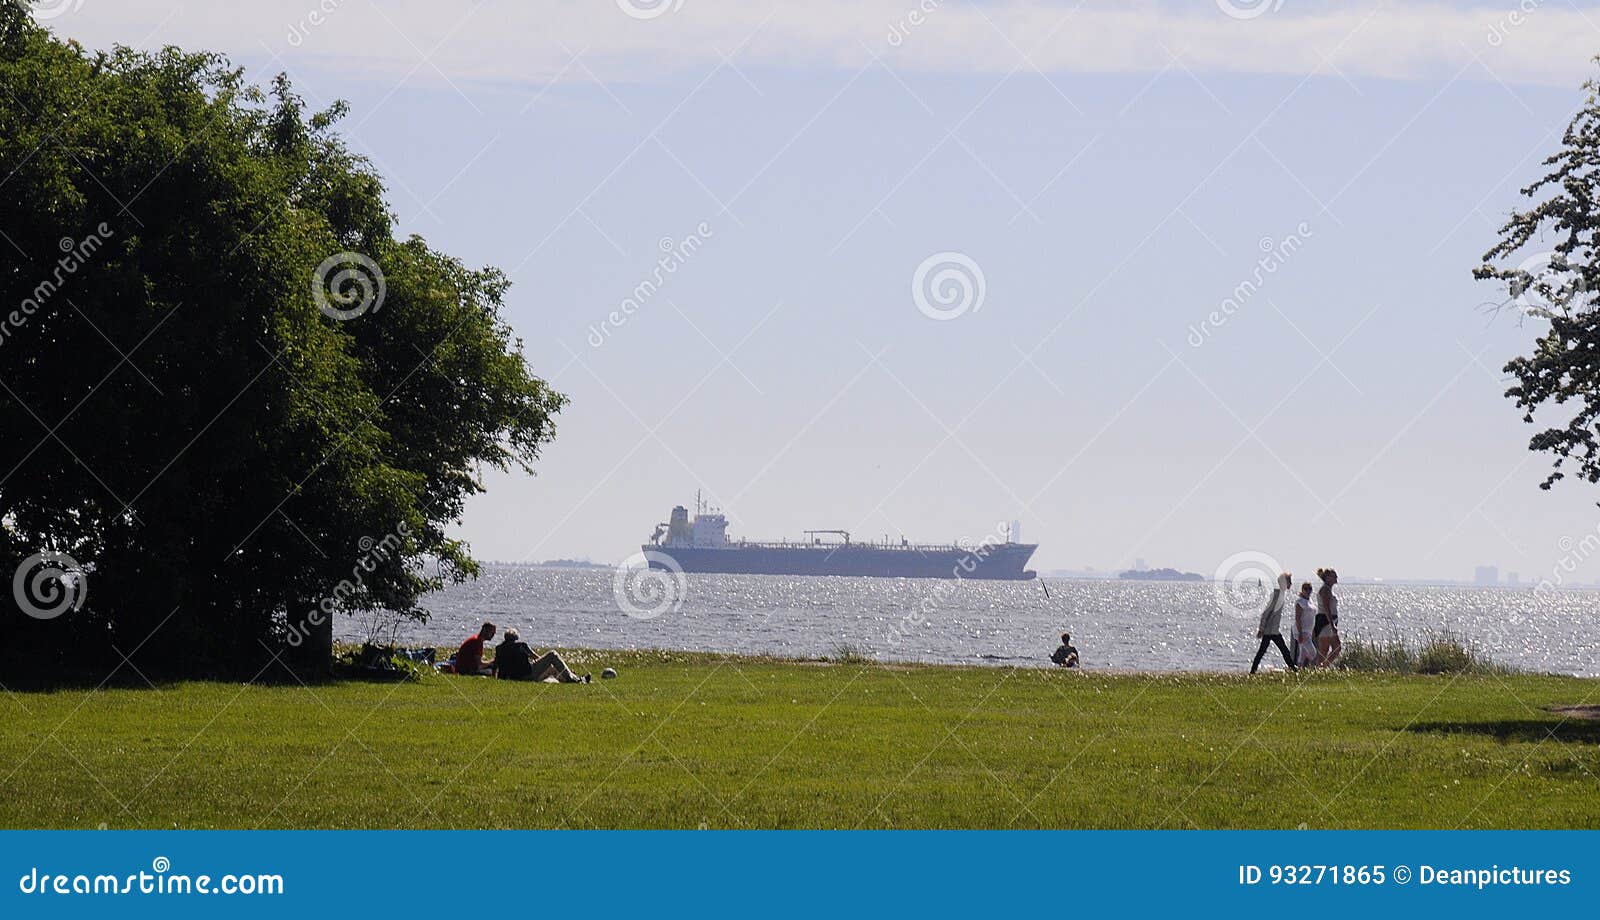 VIEW from AMAGER STRAND BEACH Editorial Image - Image of copenhagen